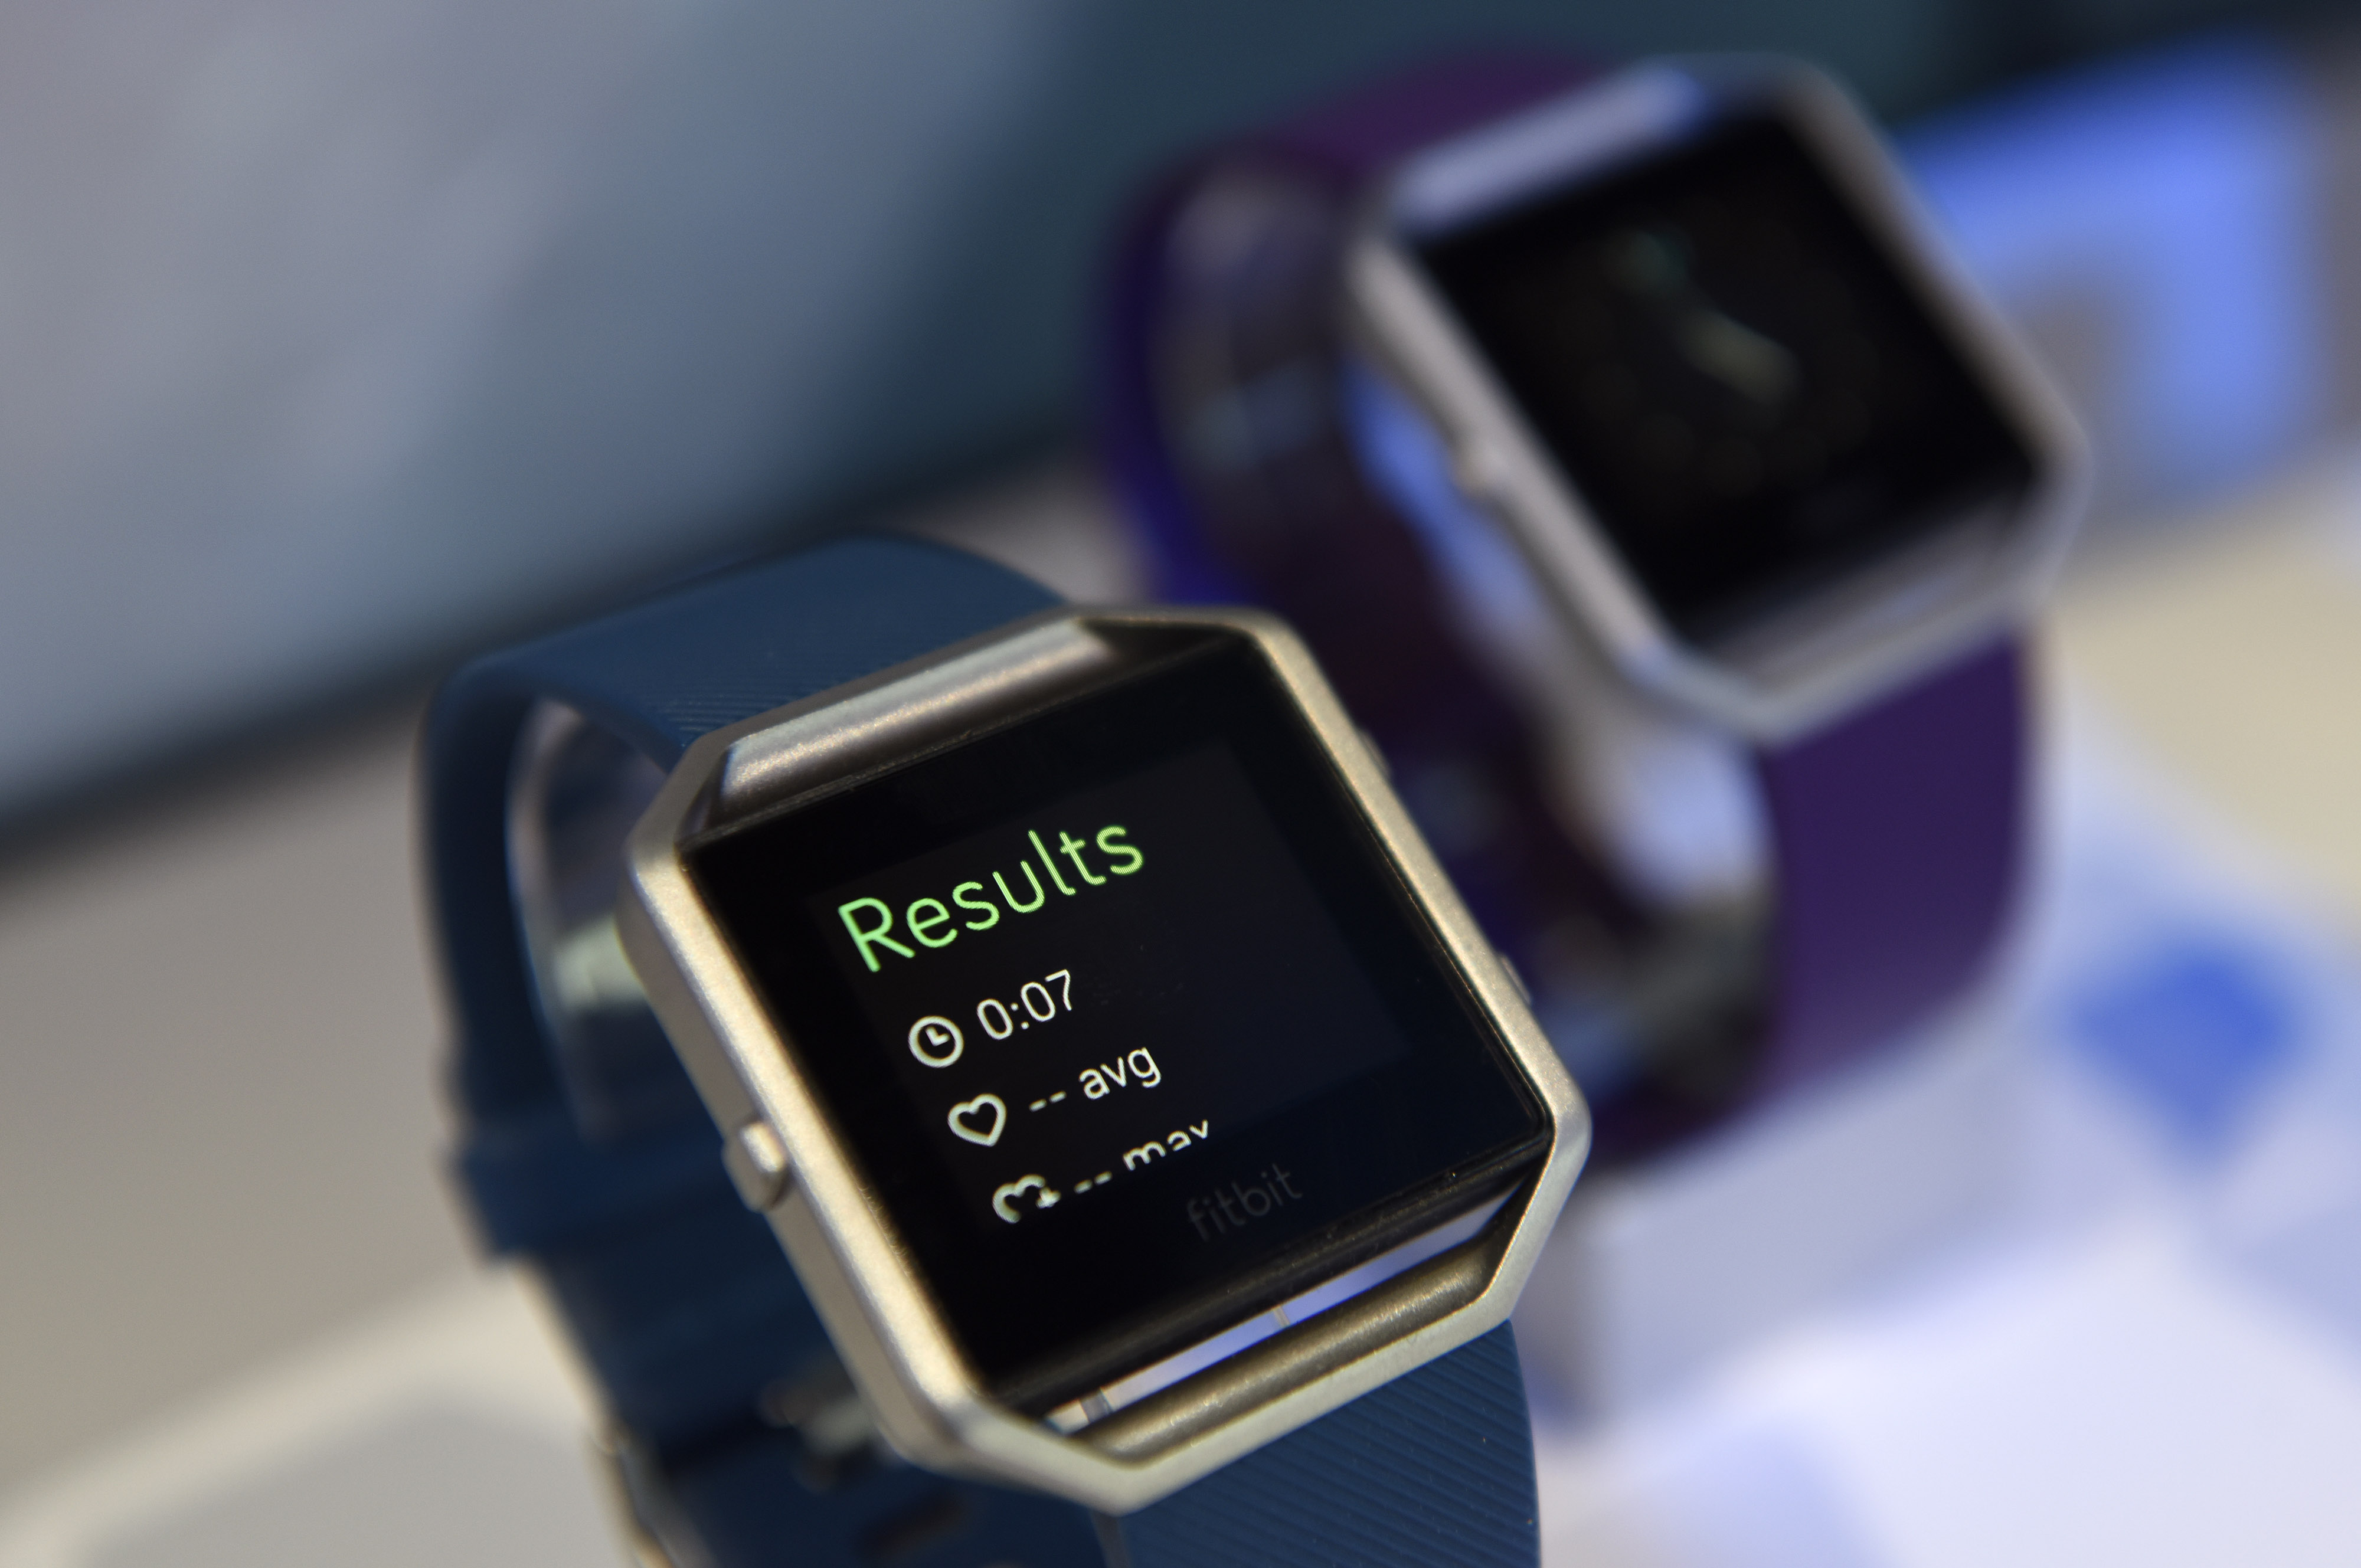 The Fitbit Blaze fitness tracker. (Bloomberg&mdash;Bloomberg via Getty Images)